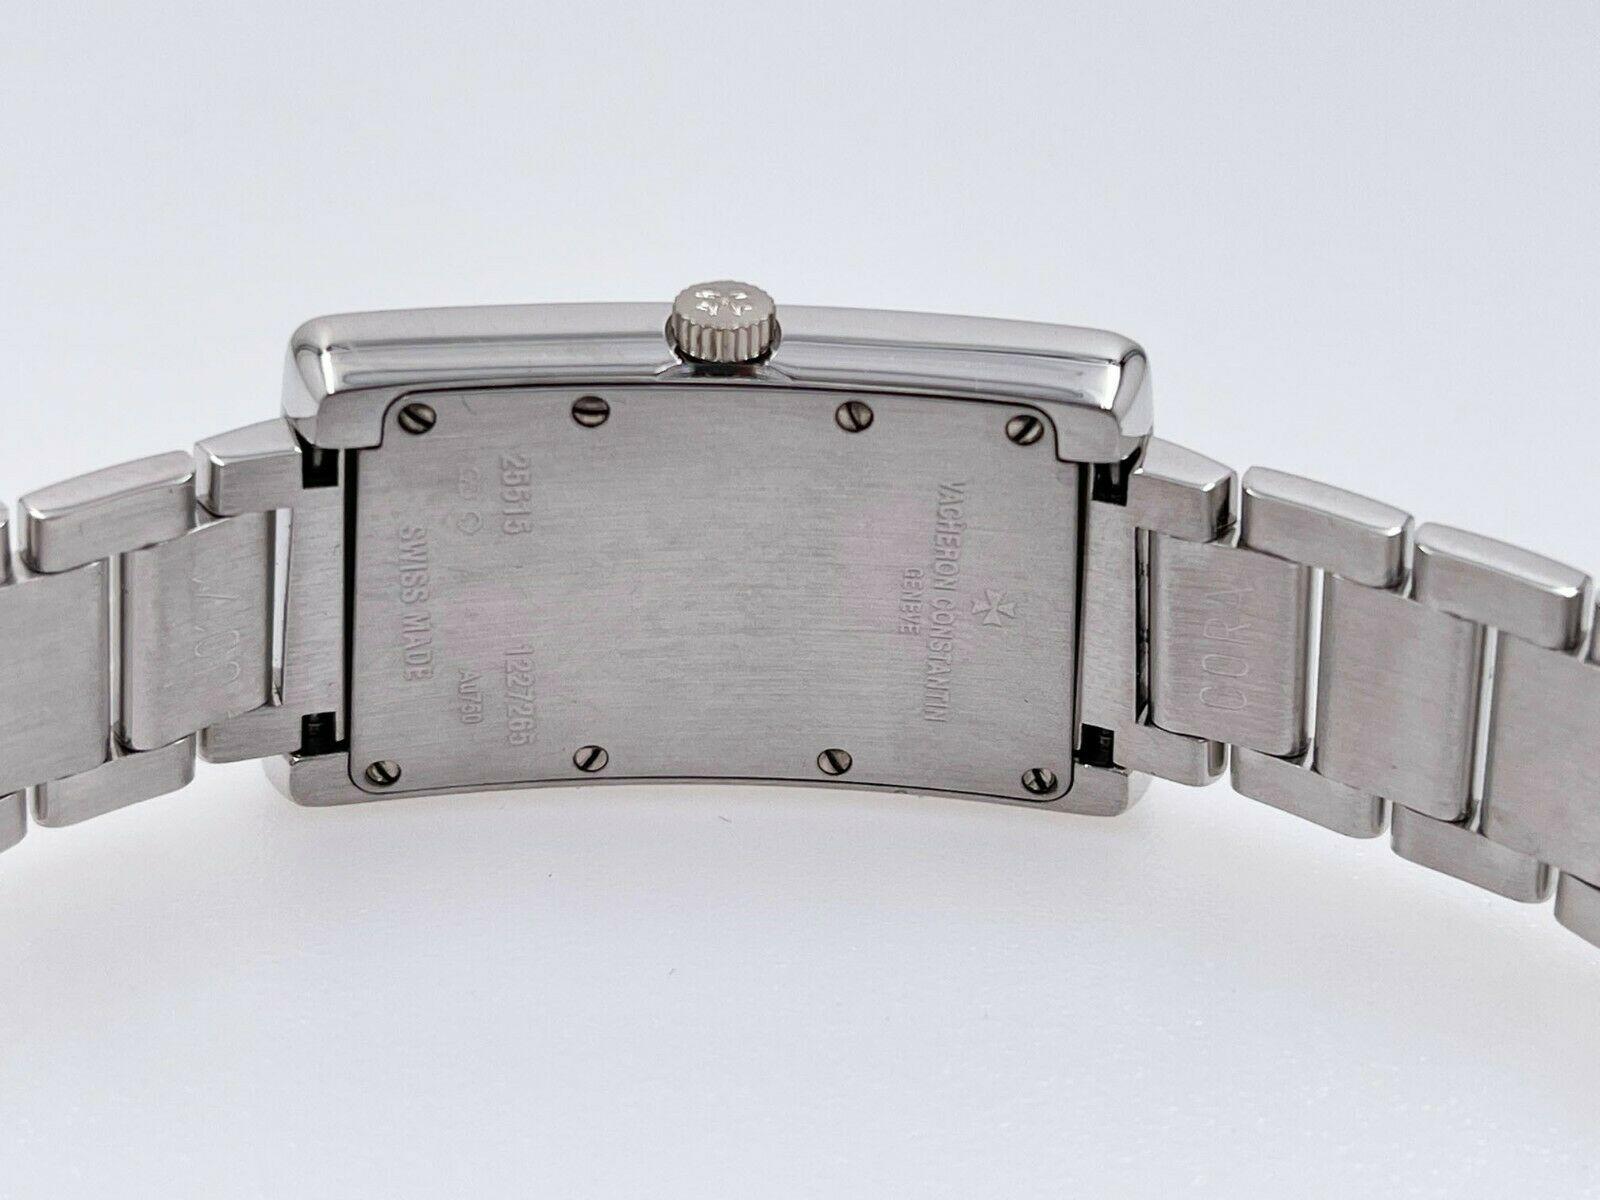 Vacheron Constantin Cambree Reference 25515/U01g-9233 Ladies 18K White Gold In Excellent Condition For Sale In San Diego, CA